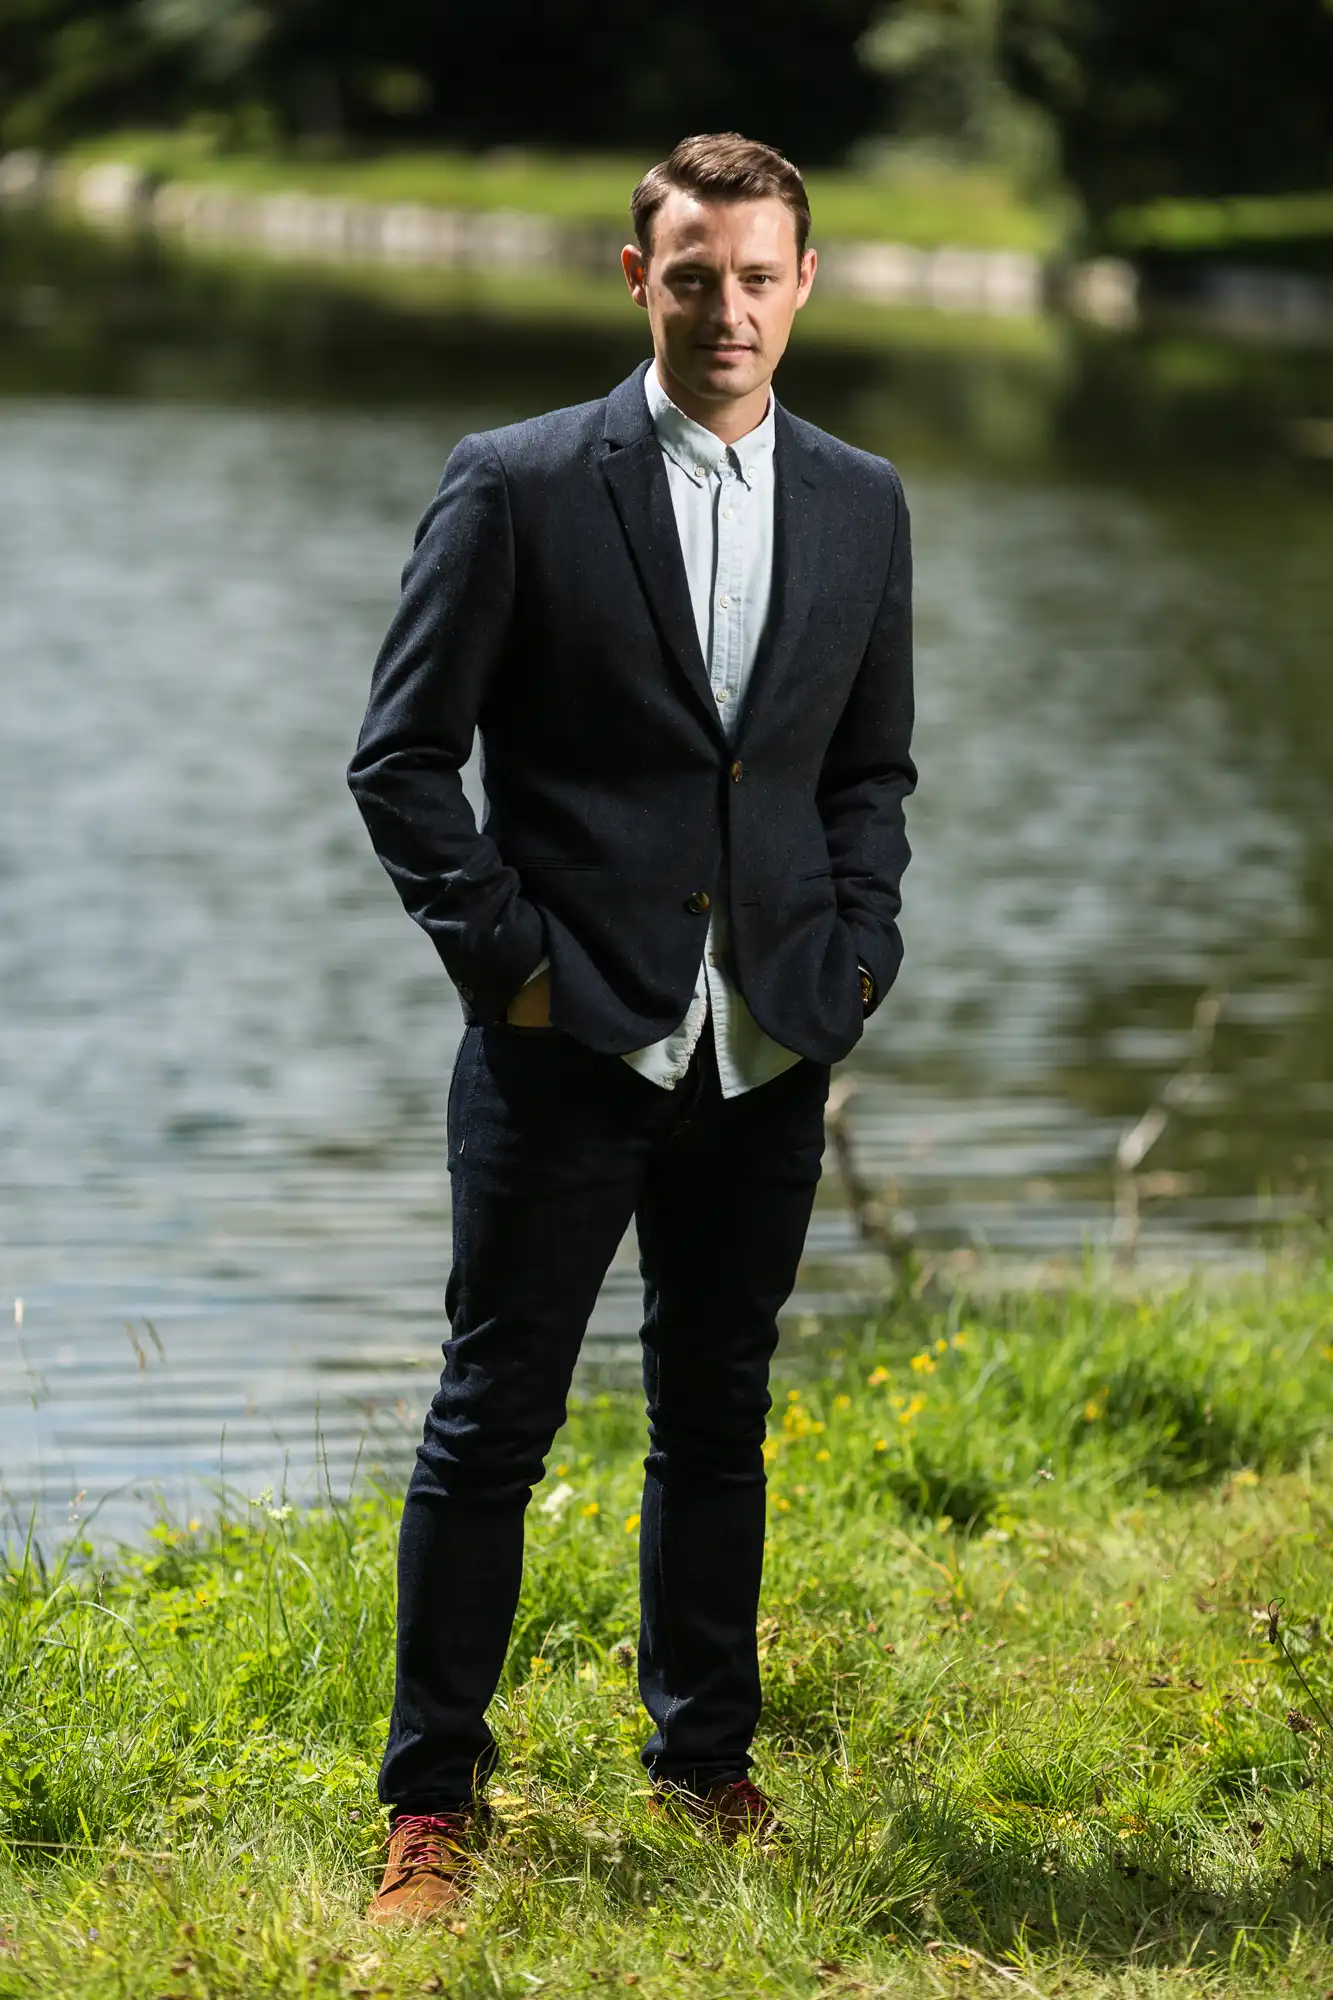 A man in a smart casual outfit stands confidently by a pond, hands in pockets, surrounded by lush greenery.